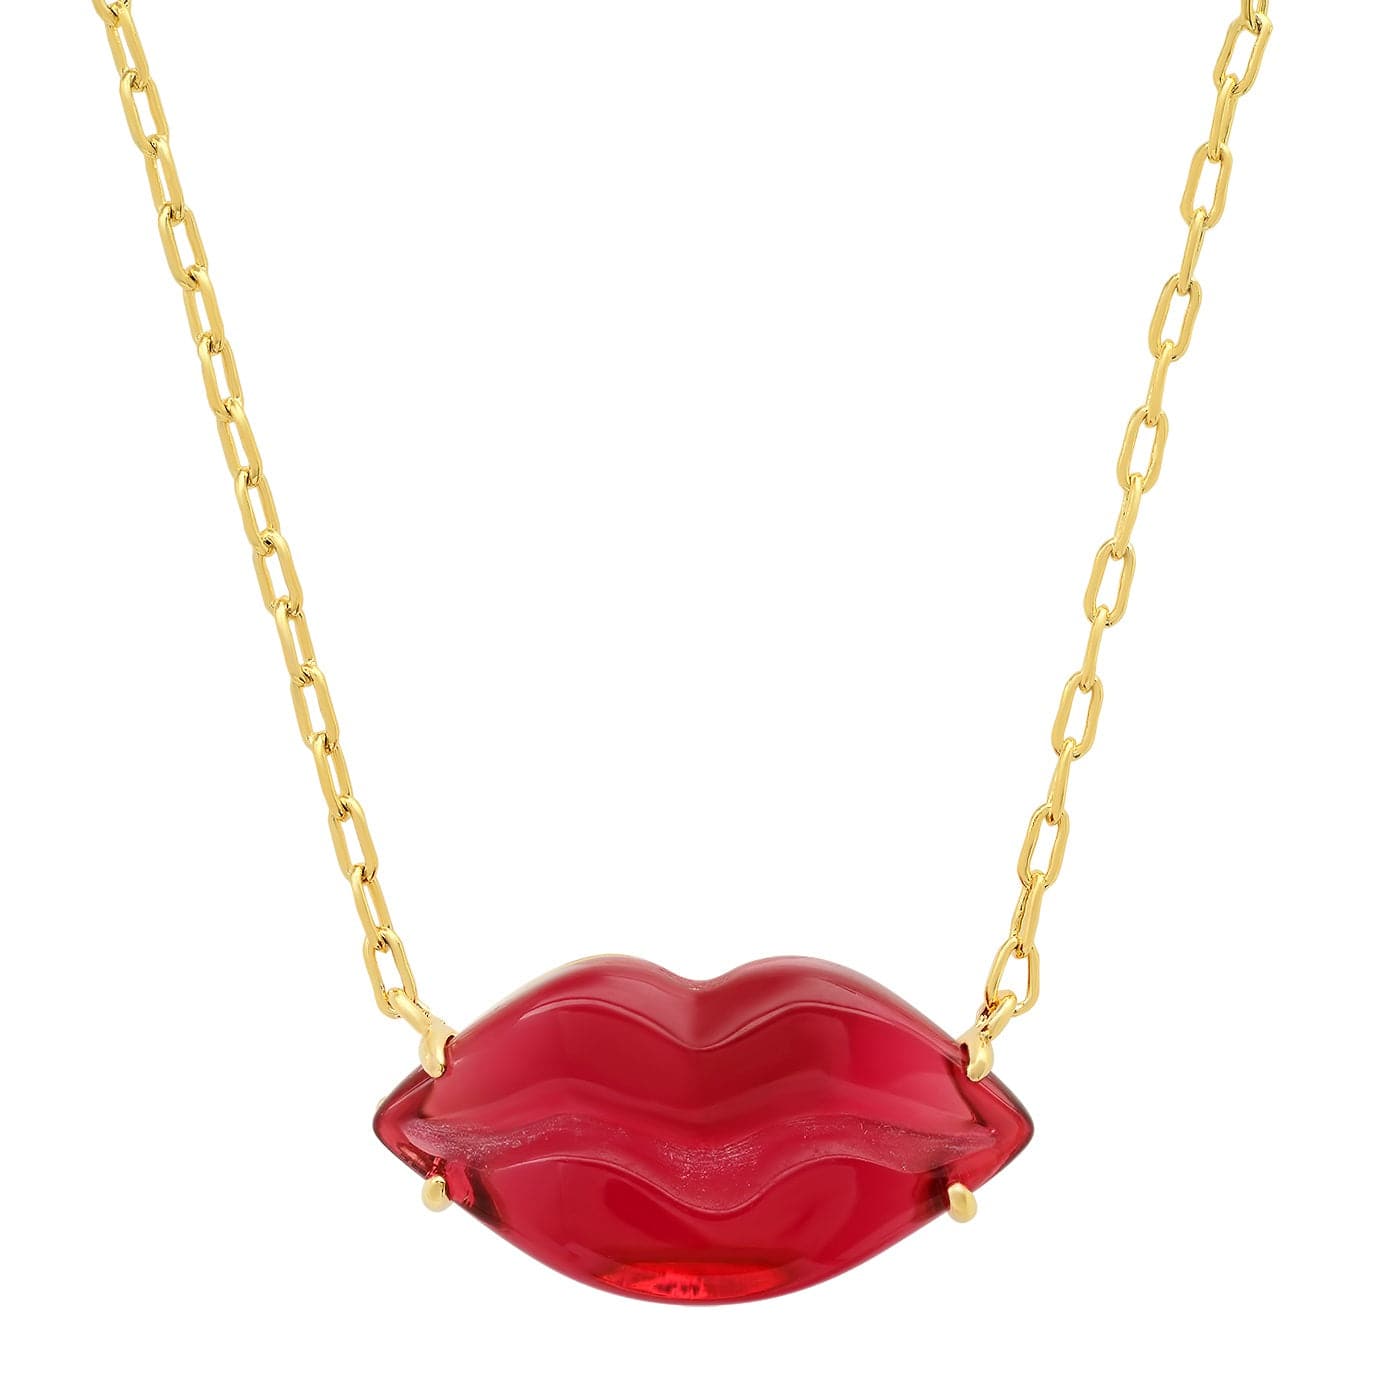 TAI JEWELRY Necklace Red Lip Pendant Necklace